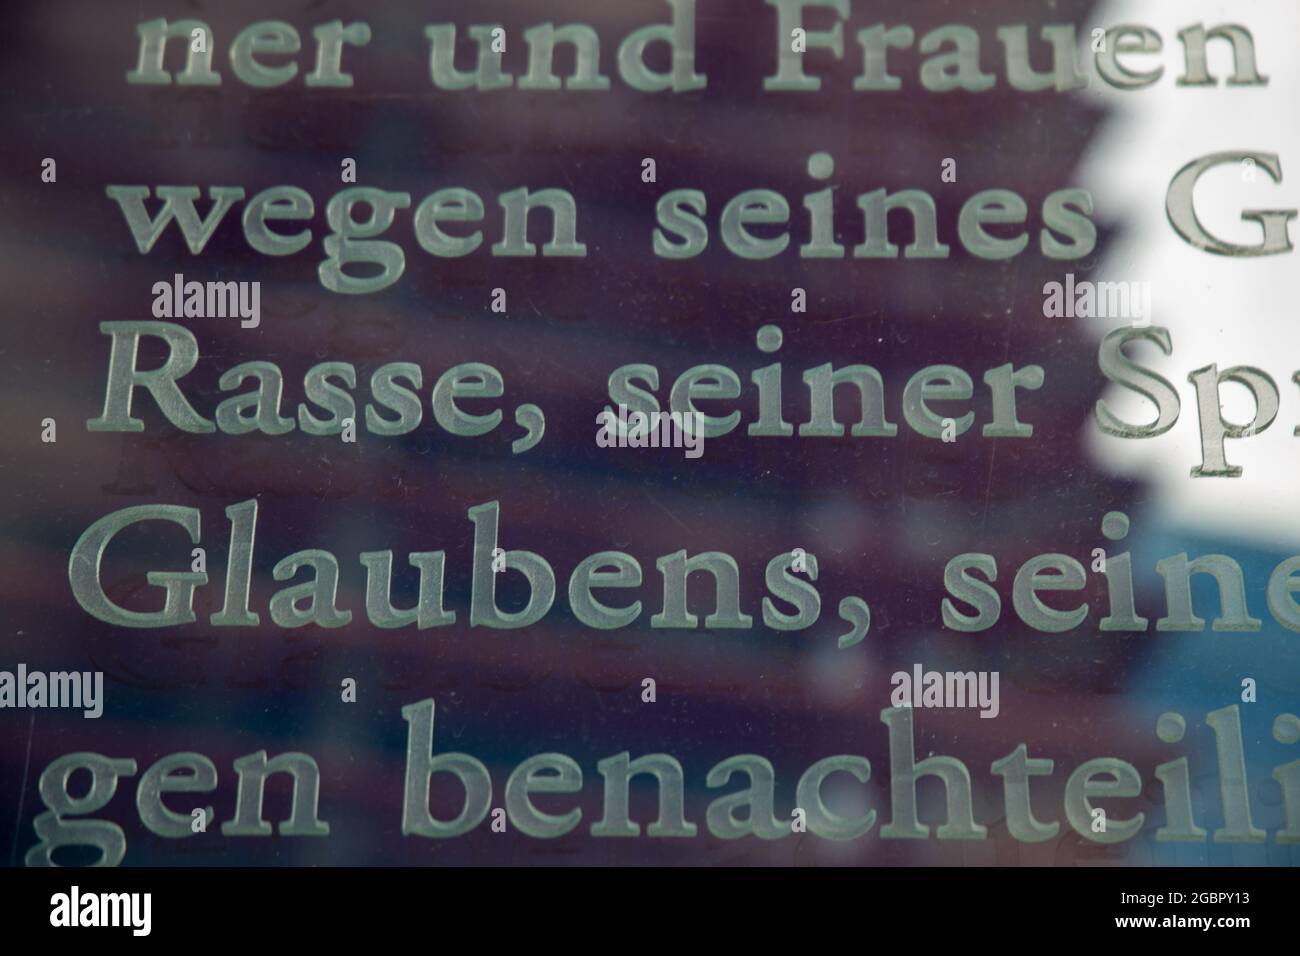 German Basic Law Article 3, Equality before the law (Gleichheit vor dem Gesetz), photographed on the glass panes at Jakob-Kaiser-Haus in Berlin Stock Photo